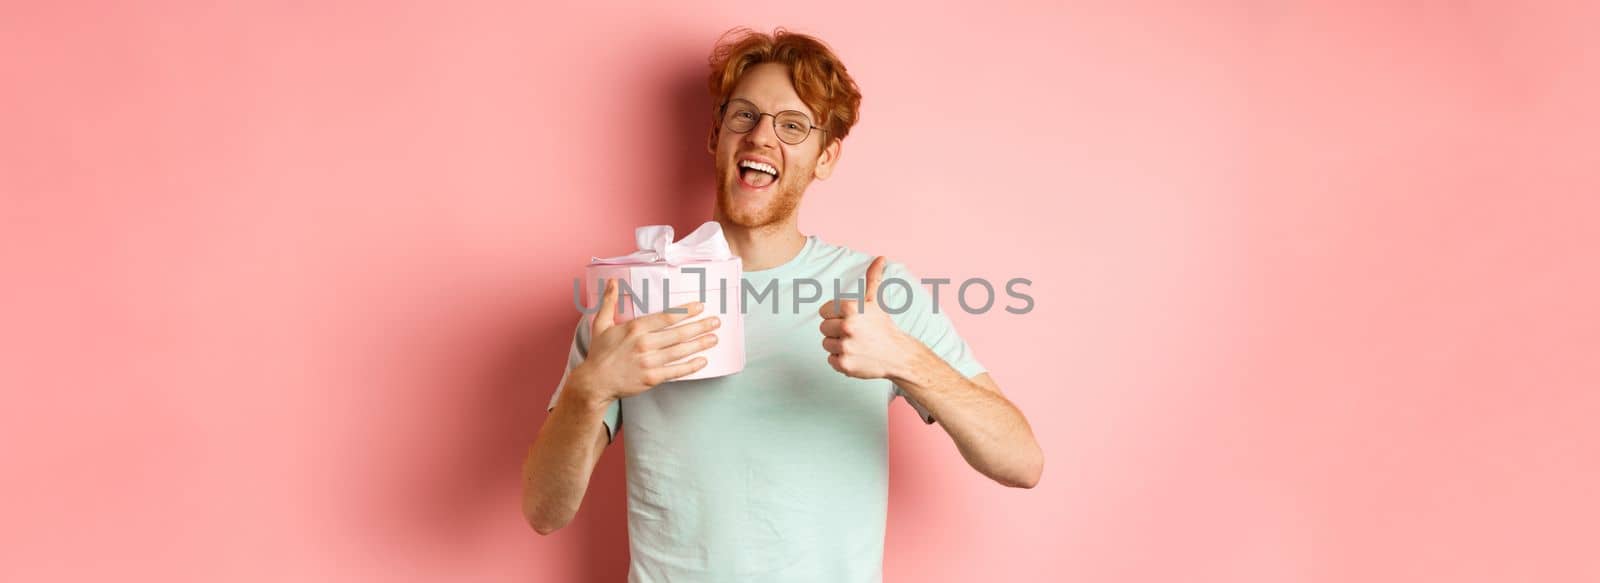 Valentines day and romance concept. Cheerful young man holding box with gift and showing thumbs-up, thanking for present, standing over pink background.